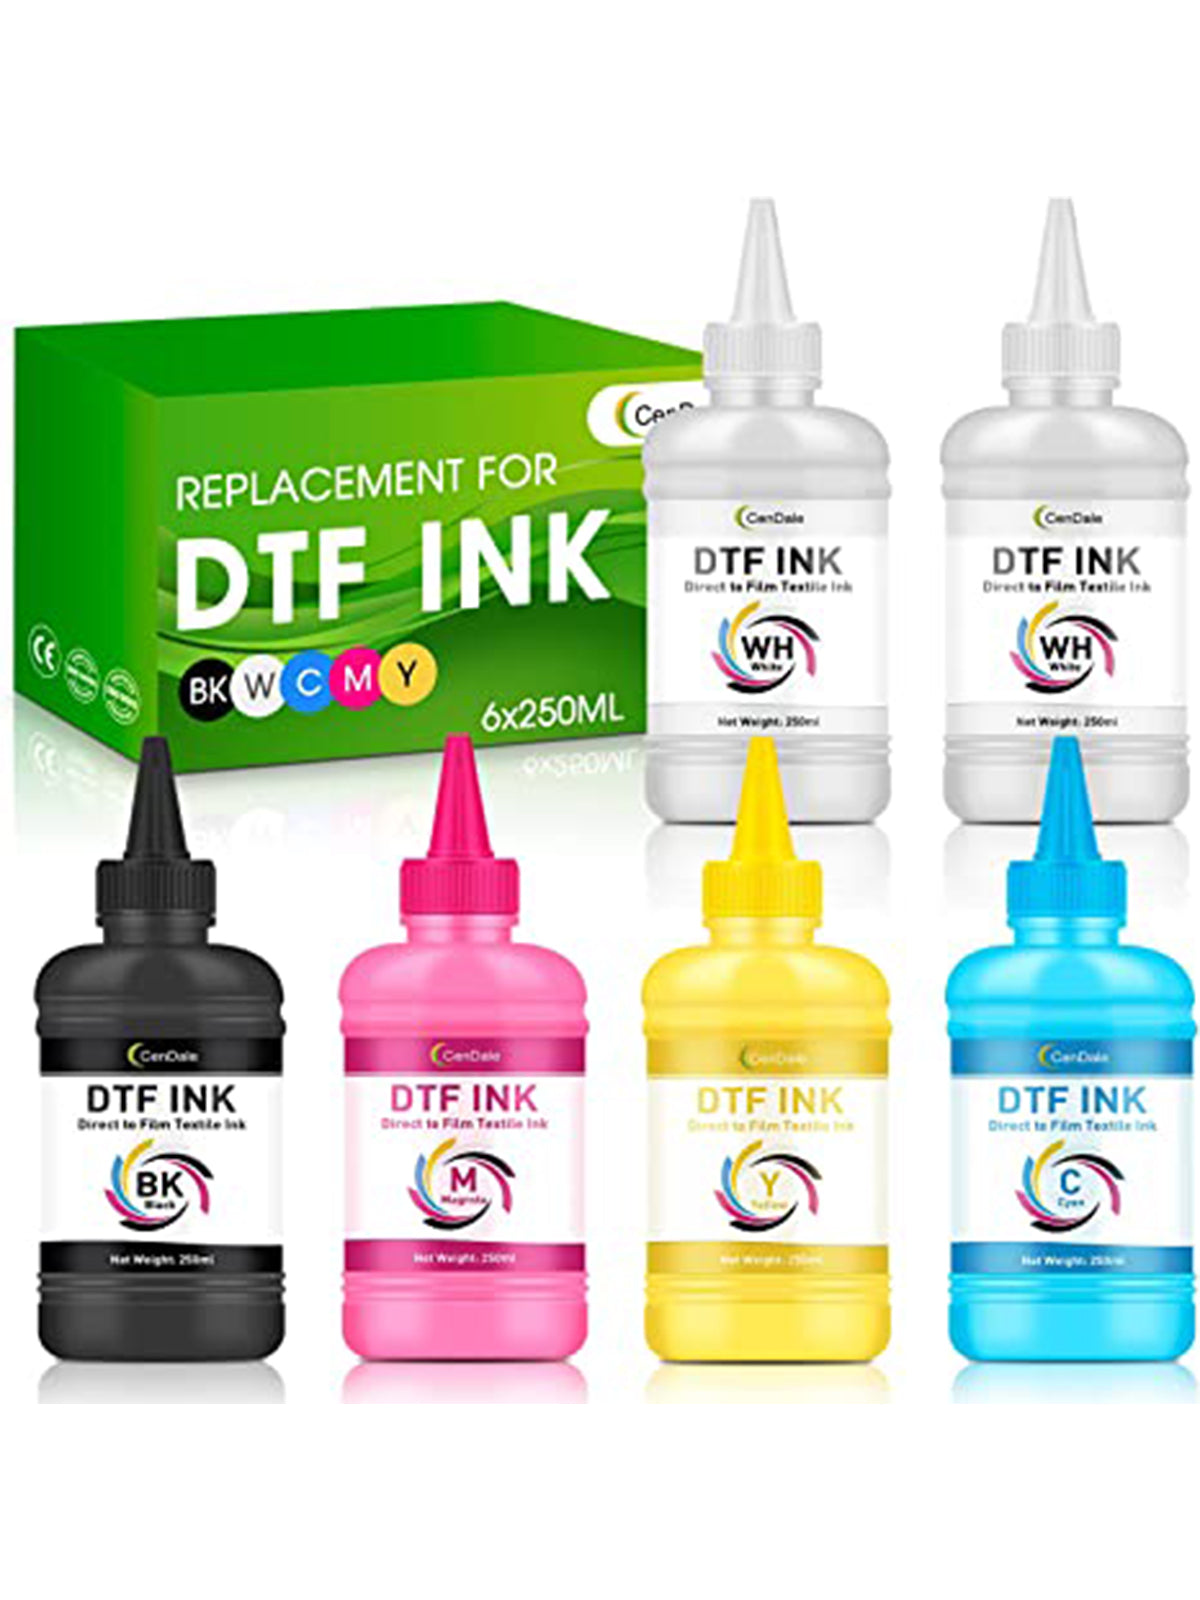 CenDale DTF Ink Premium Heat Transfer Ink for Epson ET-8550, L1800, L800,  R2400, P400, P800, XP15000 - Printing Direct to Film (250ml x 6, CMYK Wh)